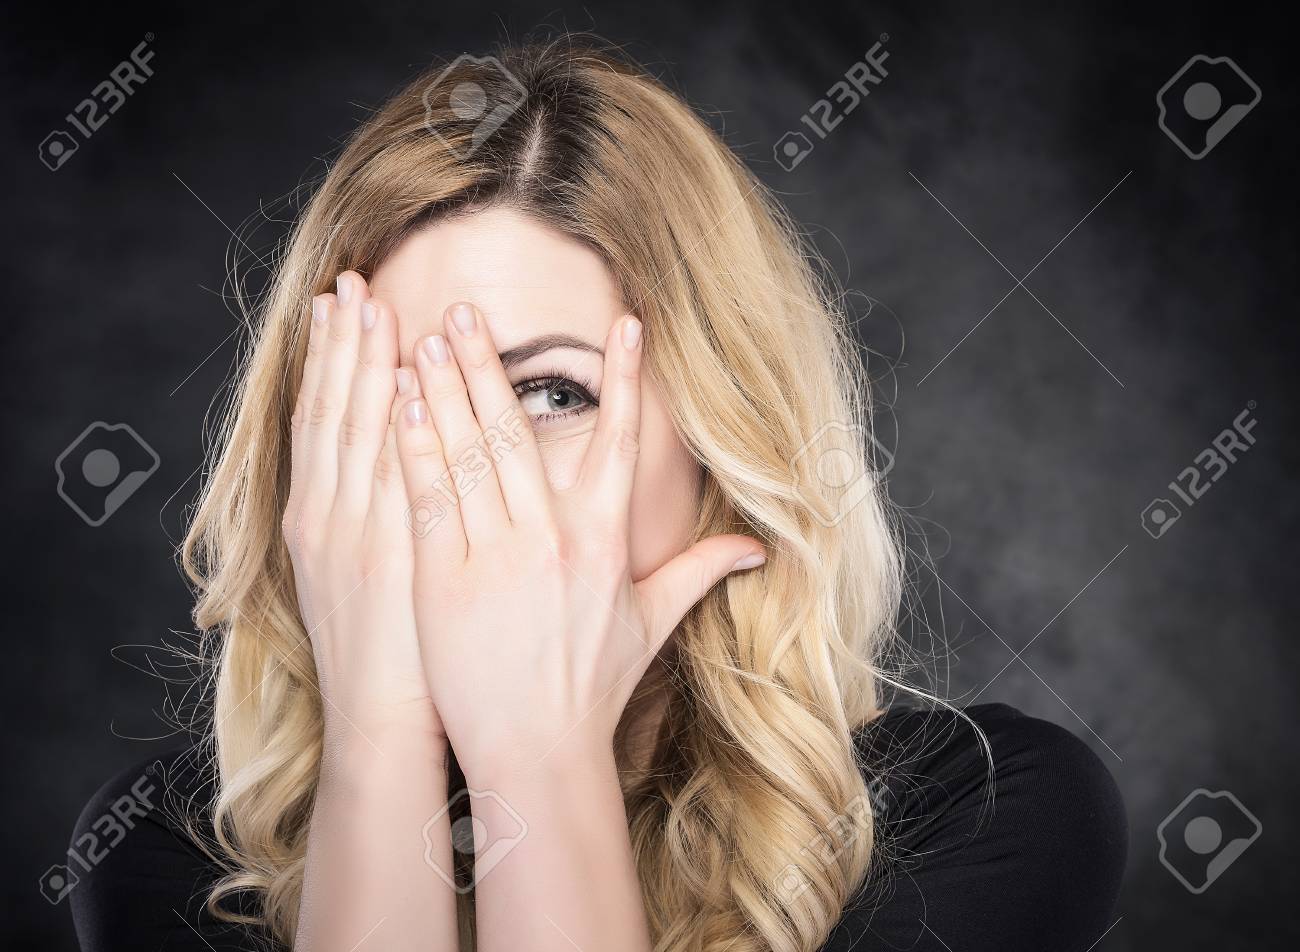 Woman Peeping Through Her Fingers Over Dark Background Stock Photo